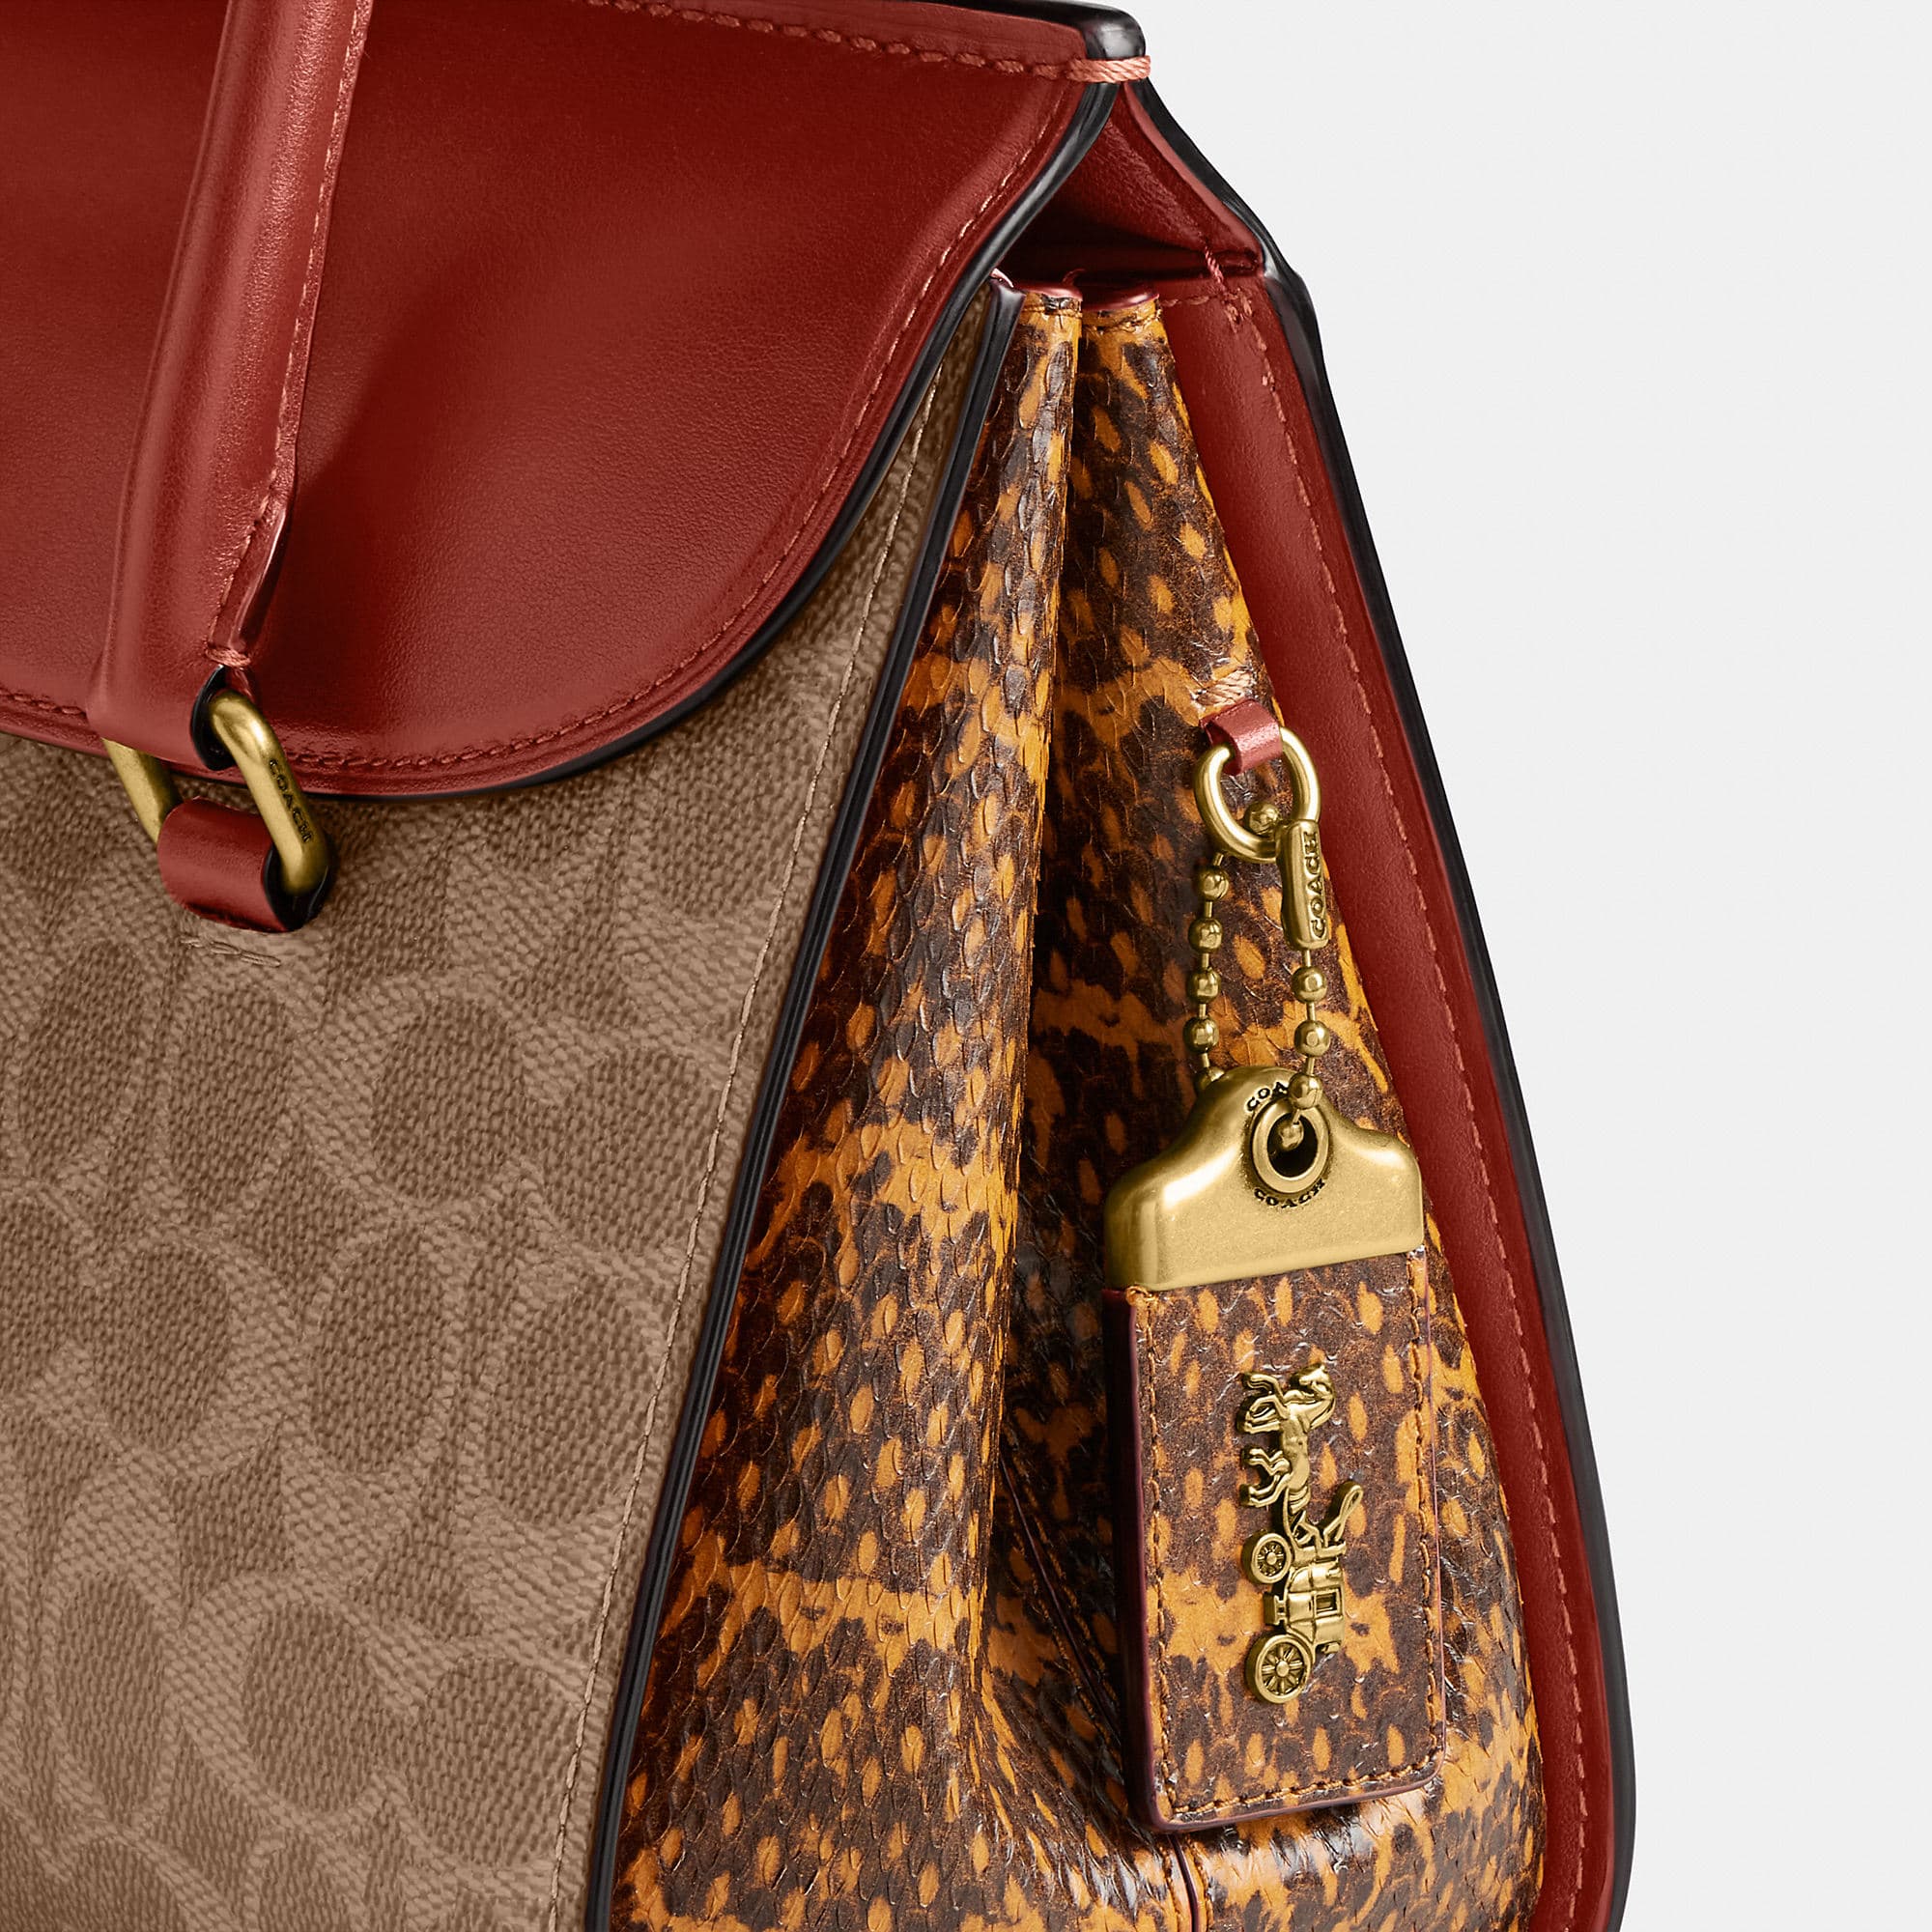 TÚI XÁCH COACH NỮ BROOME CARRYALL IN SIGNATURE COATED CANVAS WITH SNAKESKIN DETAIL CP449 1